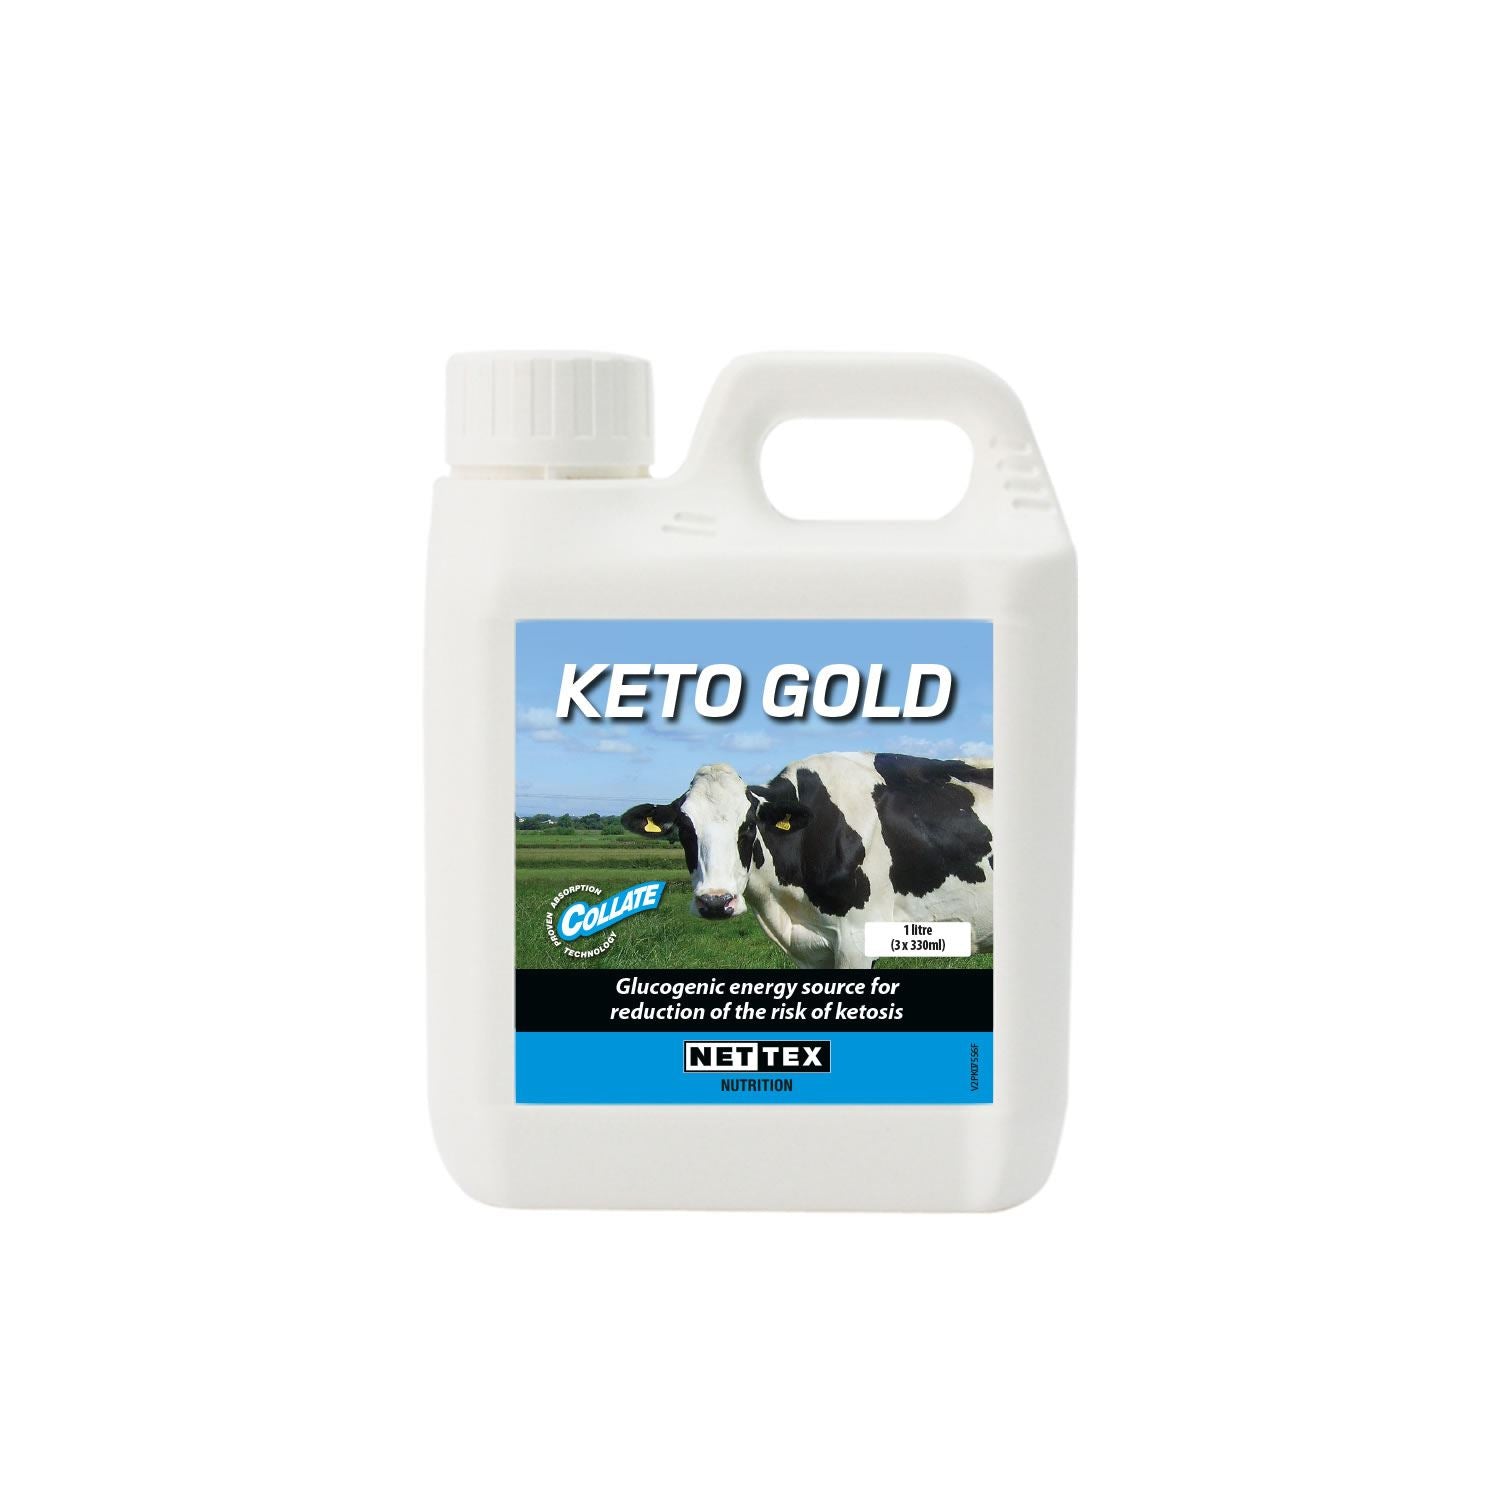 Nettex Keto Gold - Just Horse Riders